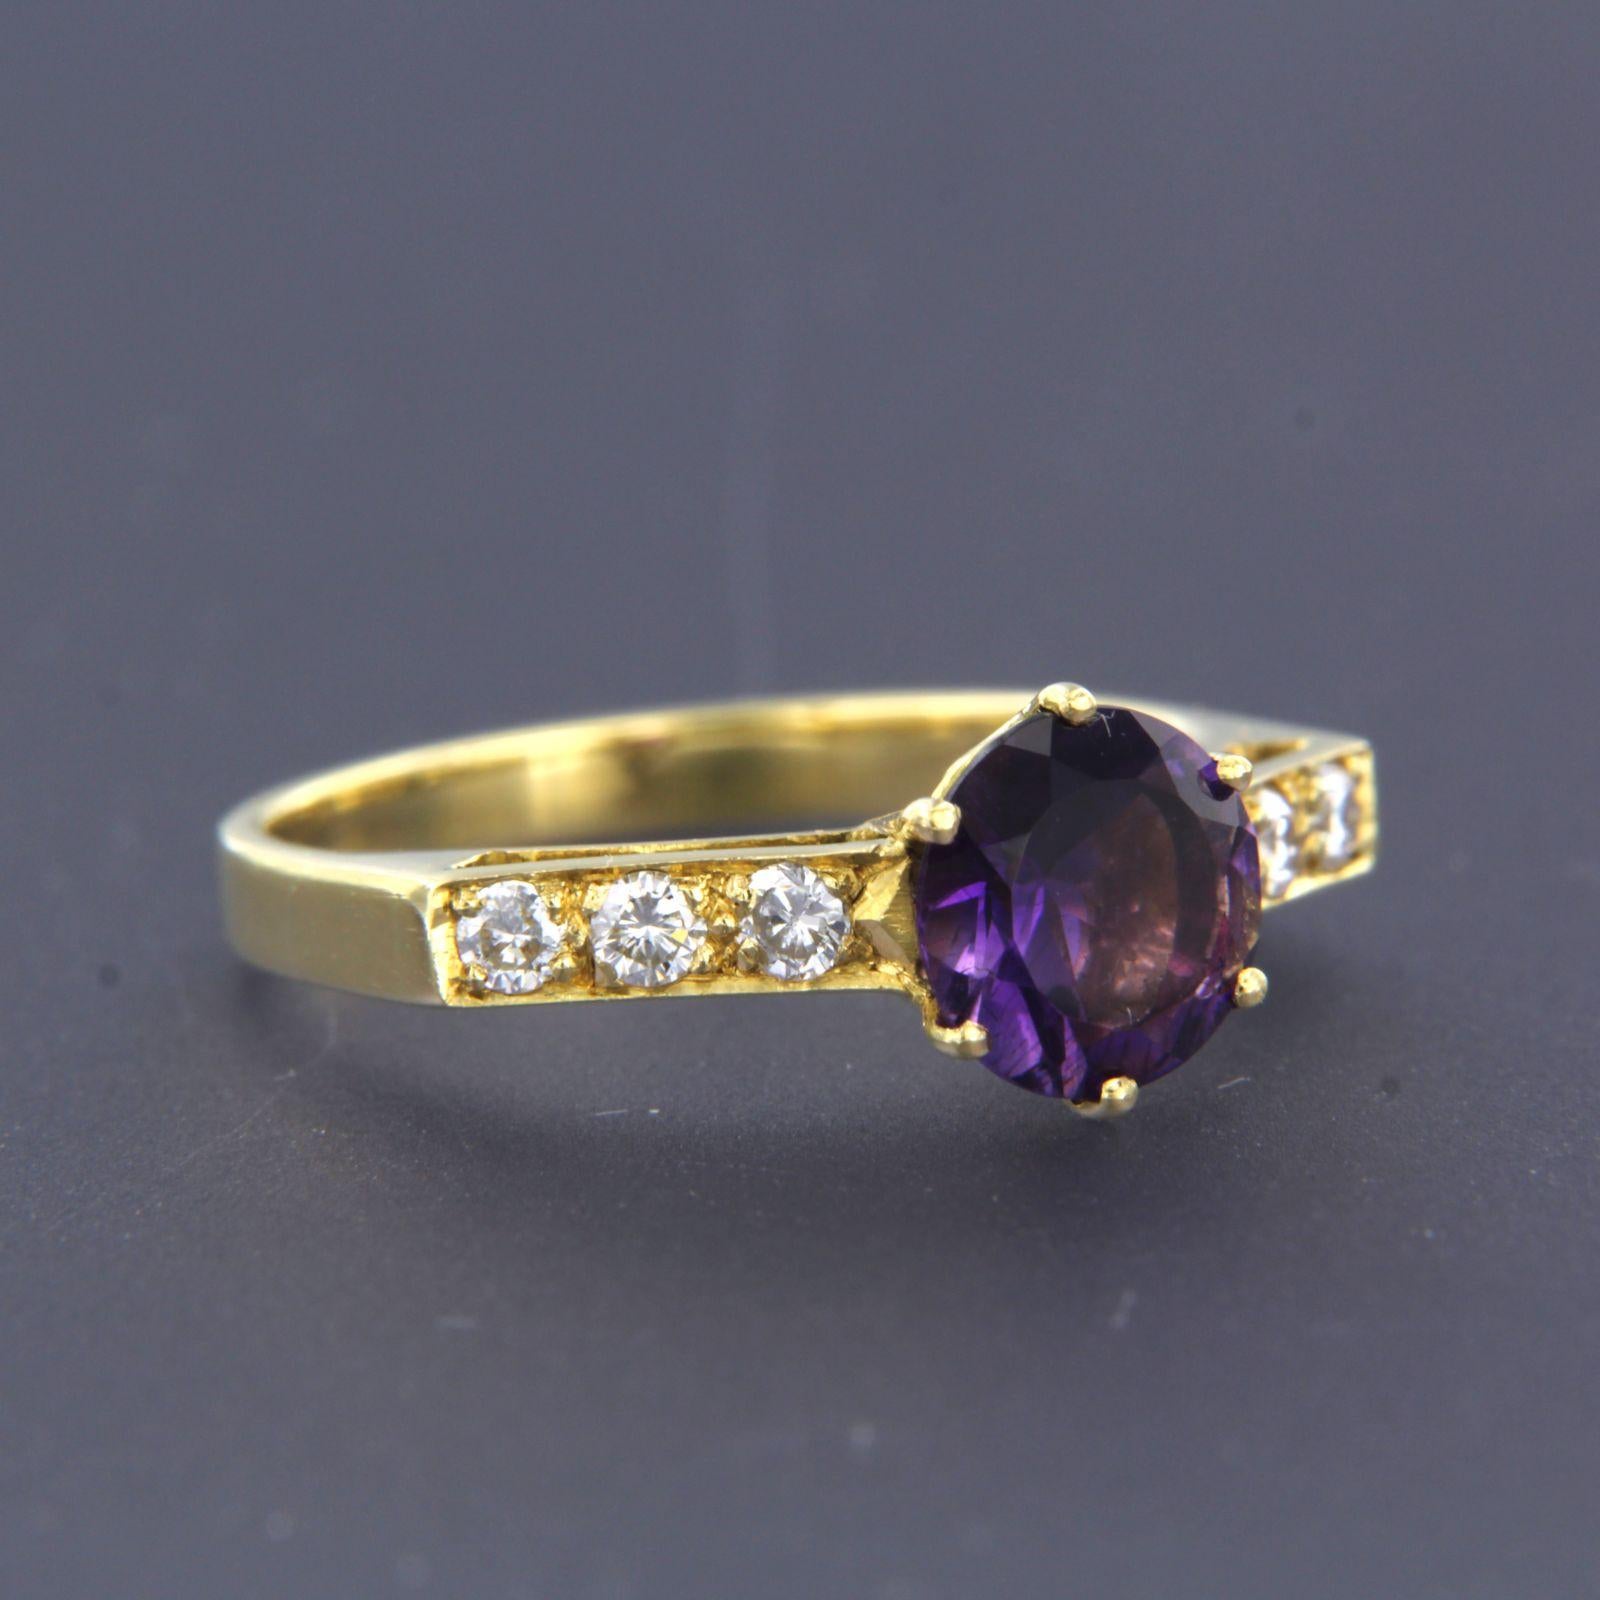 Women's Ring with amethyst and diamonds 18k yellow gold For Sale